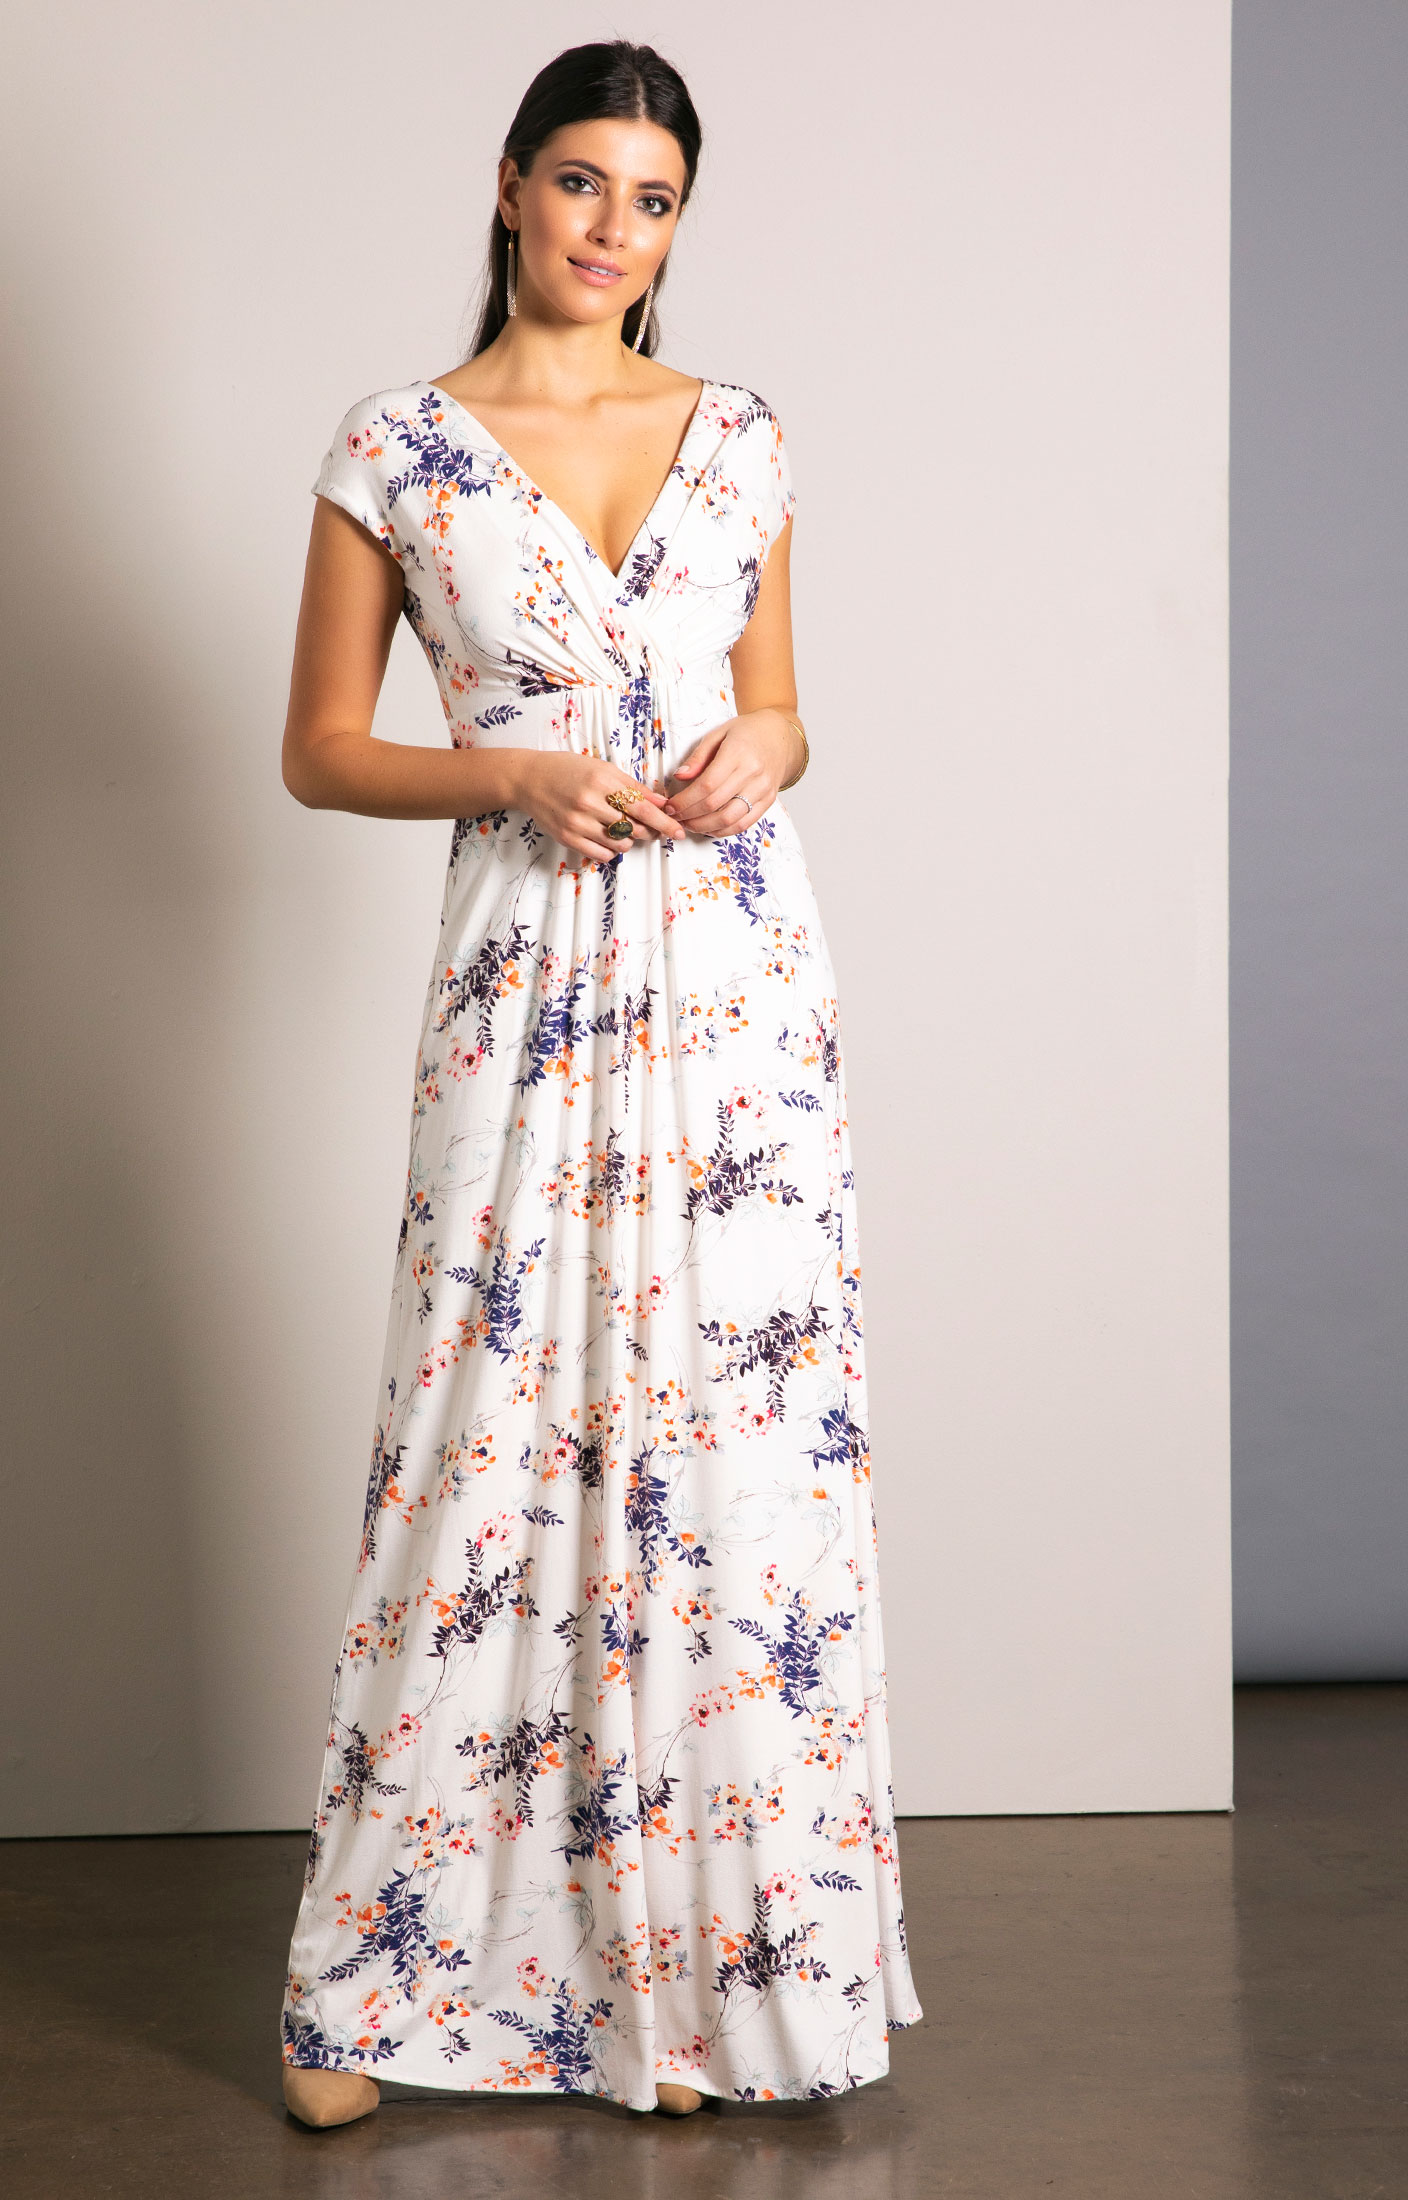 Sophia Maxi Dress (Japanese Wear Dresses, Alie Wedding and by Clothes - Garden) Party Evening